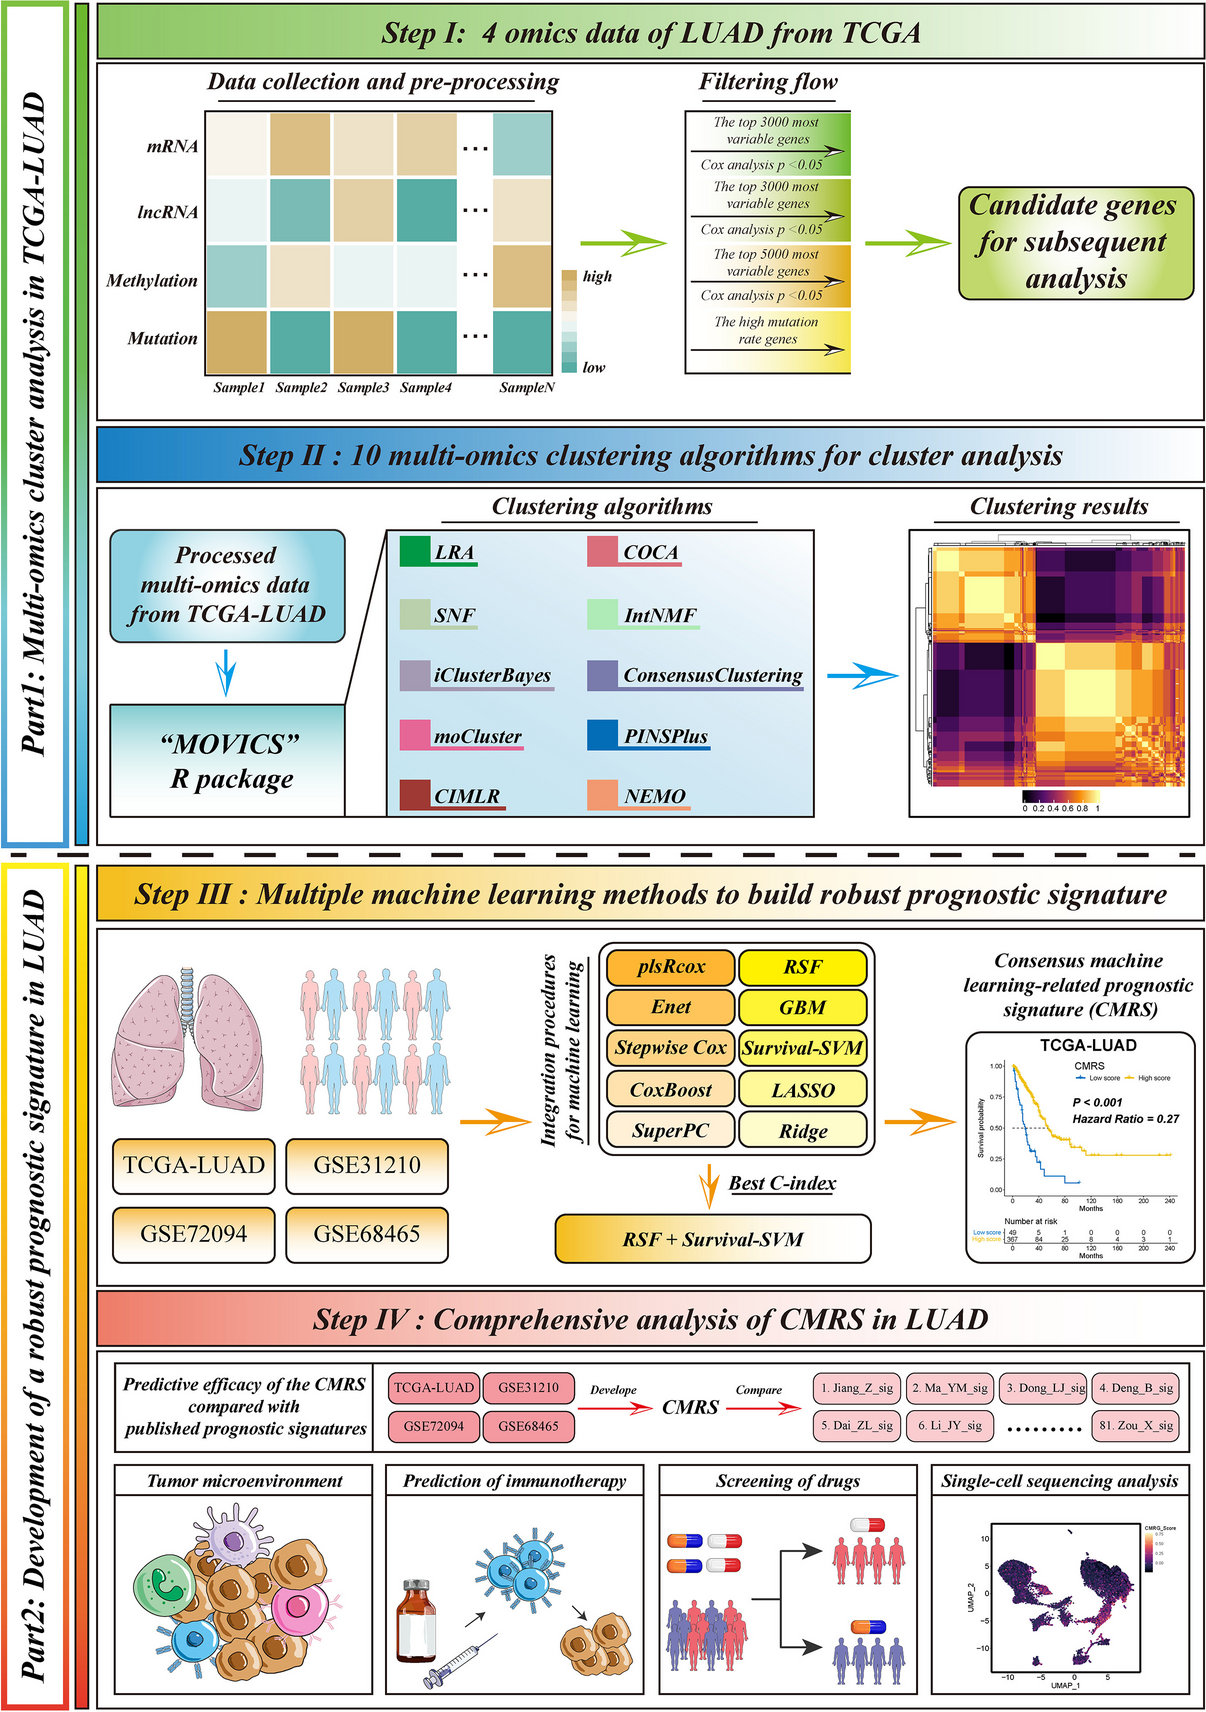 Integrated multi-omics analysis and machine learning to refine molecular subtypes, prognosis, and immunotherapy in lung adenocarcinoma